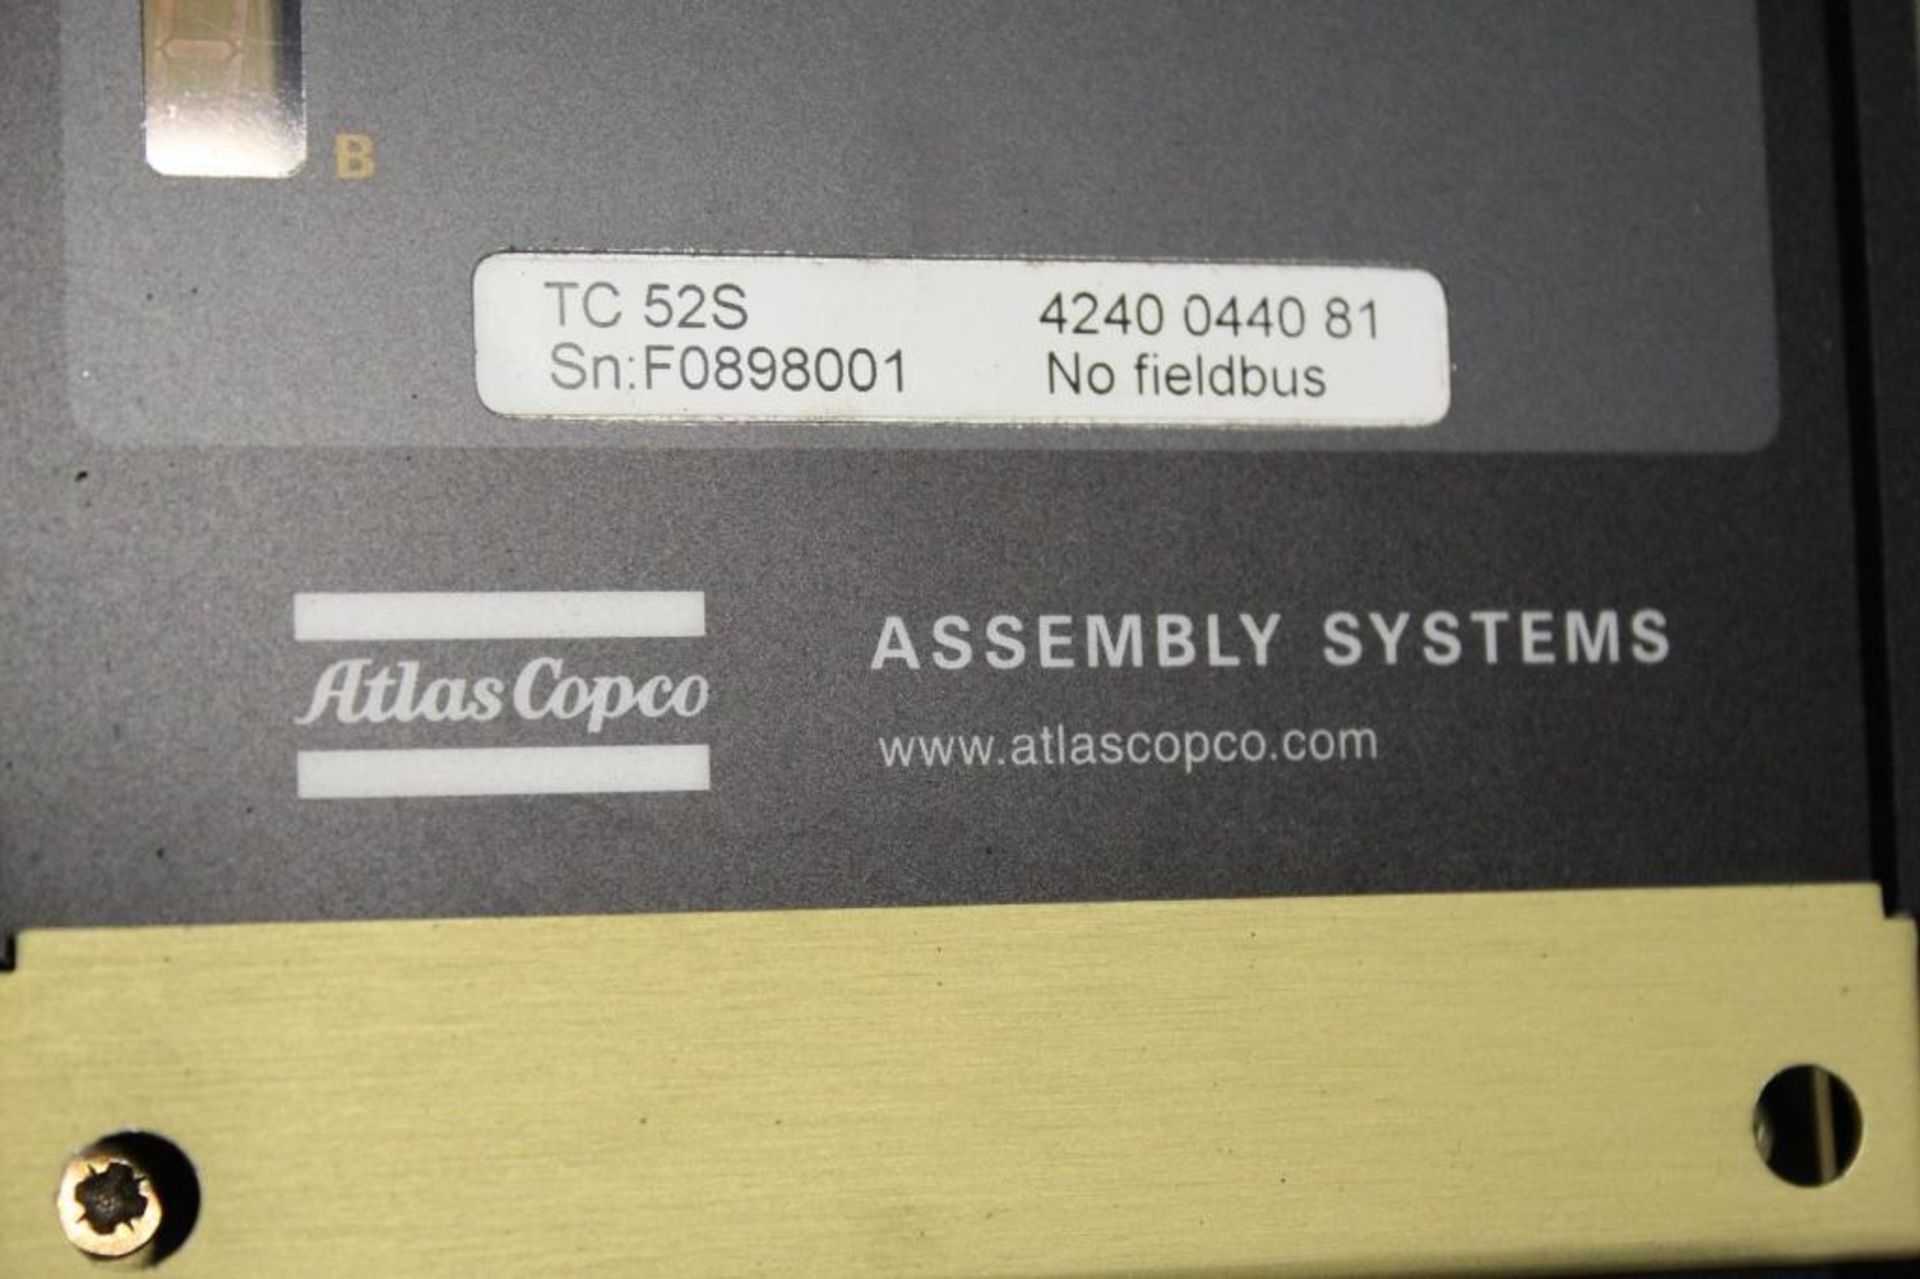 Atlas Copco 4240 0440 81 Power MACS Assembly Systems Controller - Image 2 of 2